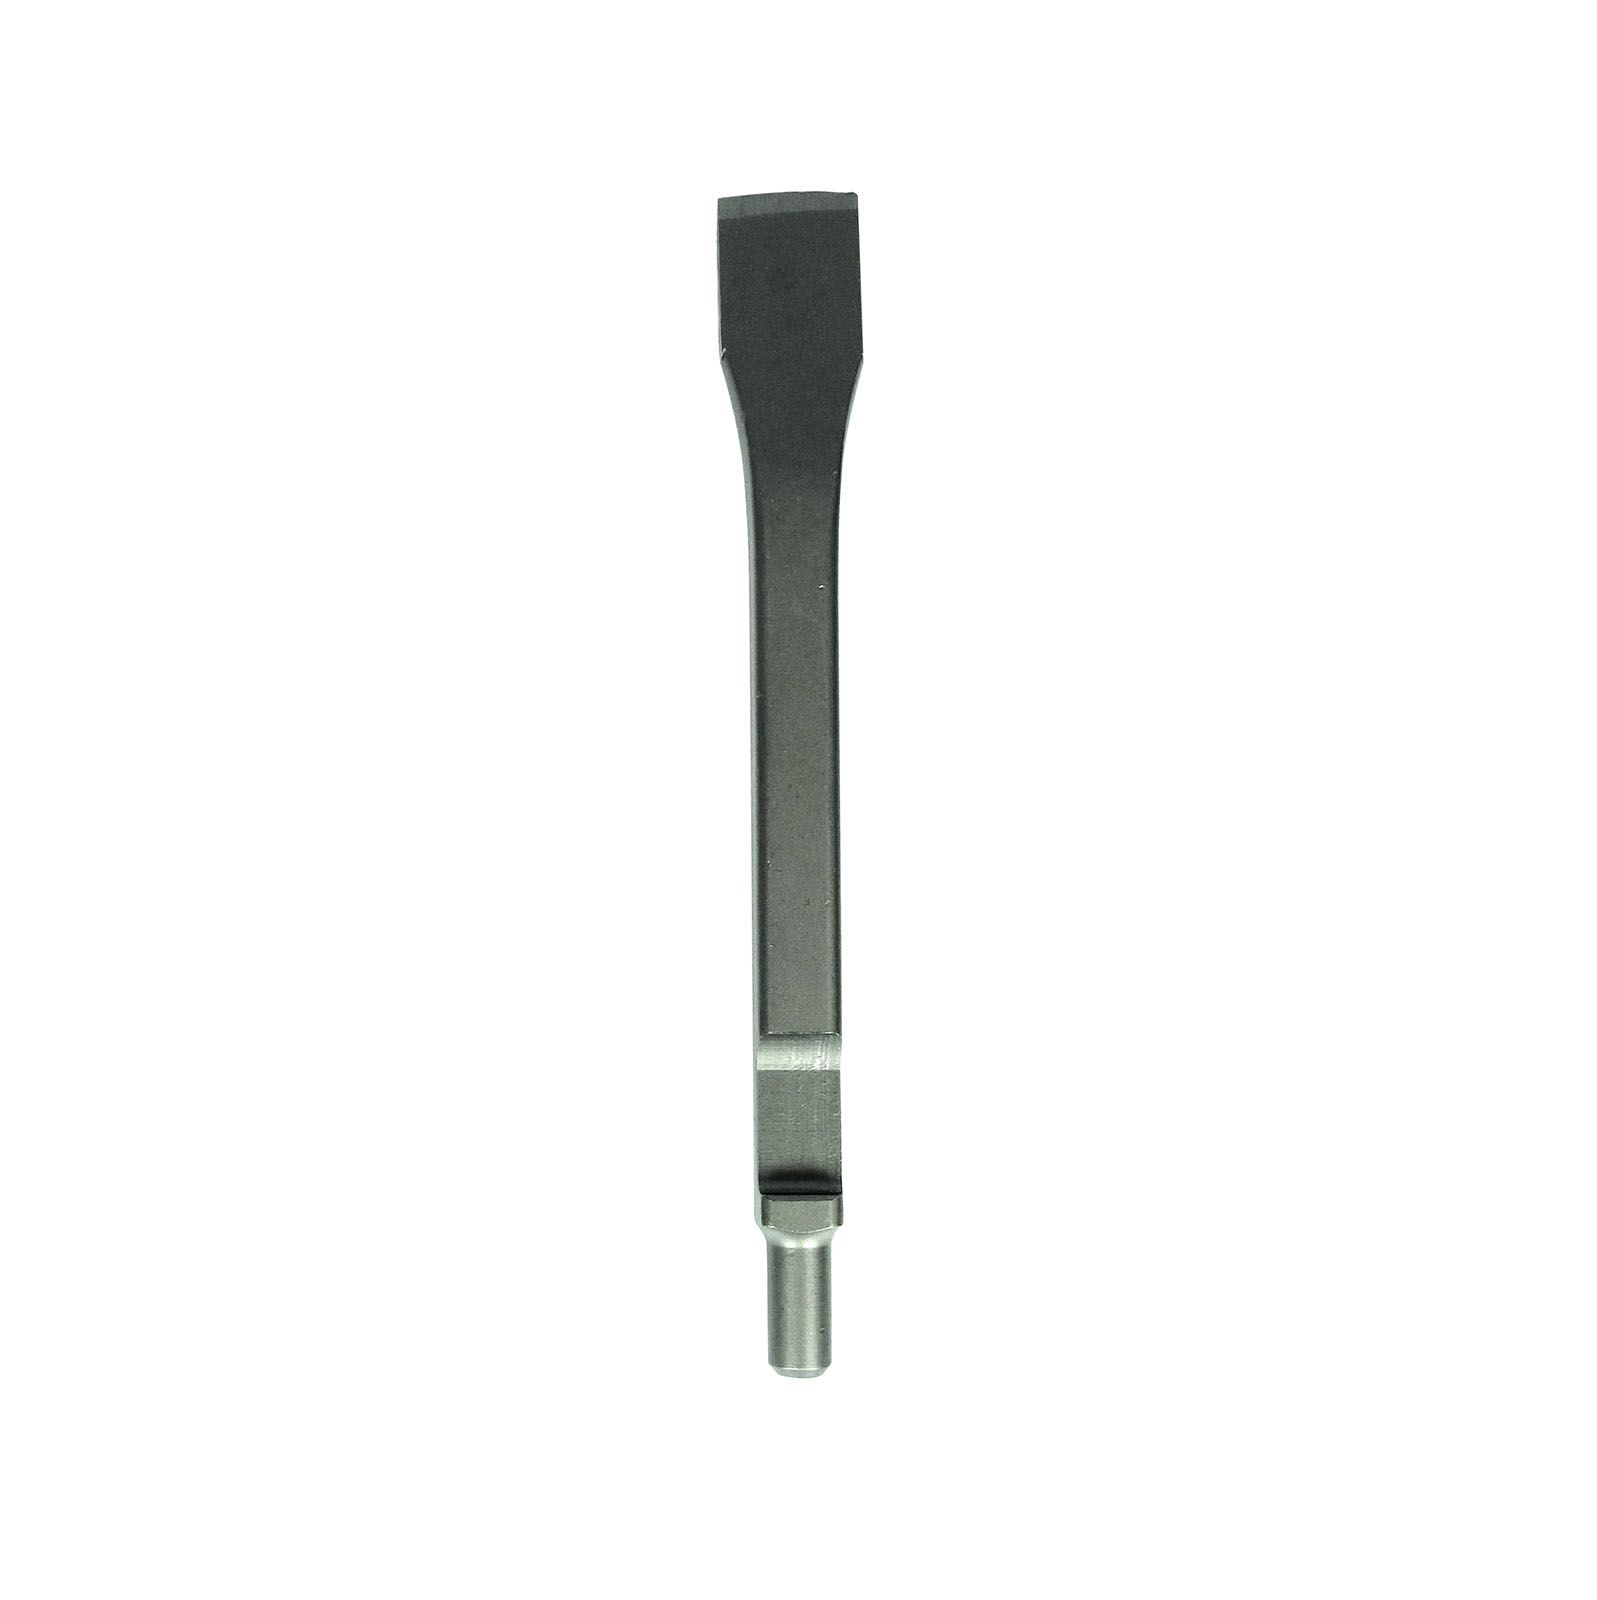 FLAT CHISEL SHANK ISO SQUARE 1/2'' productfoto